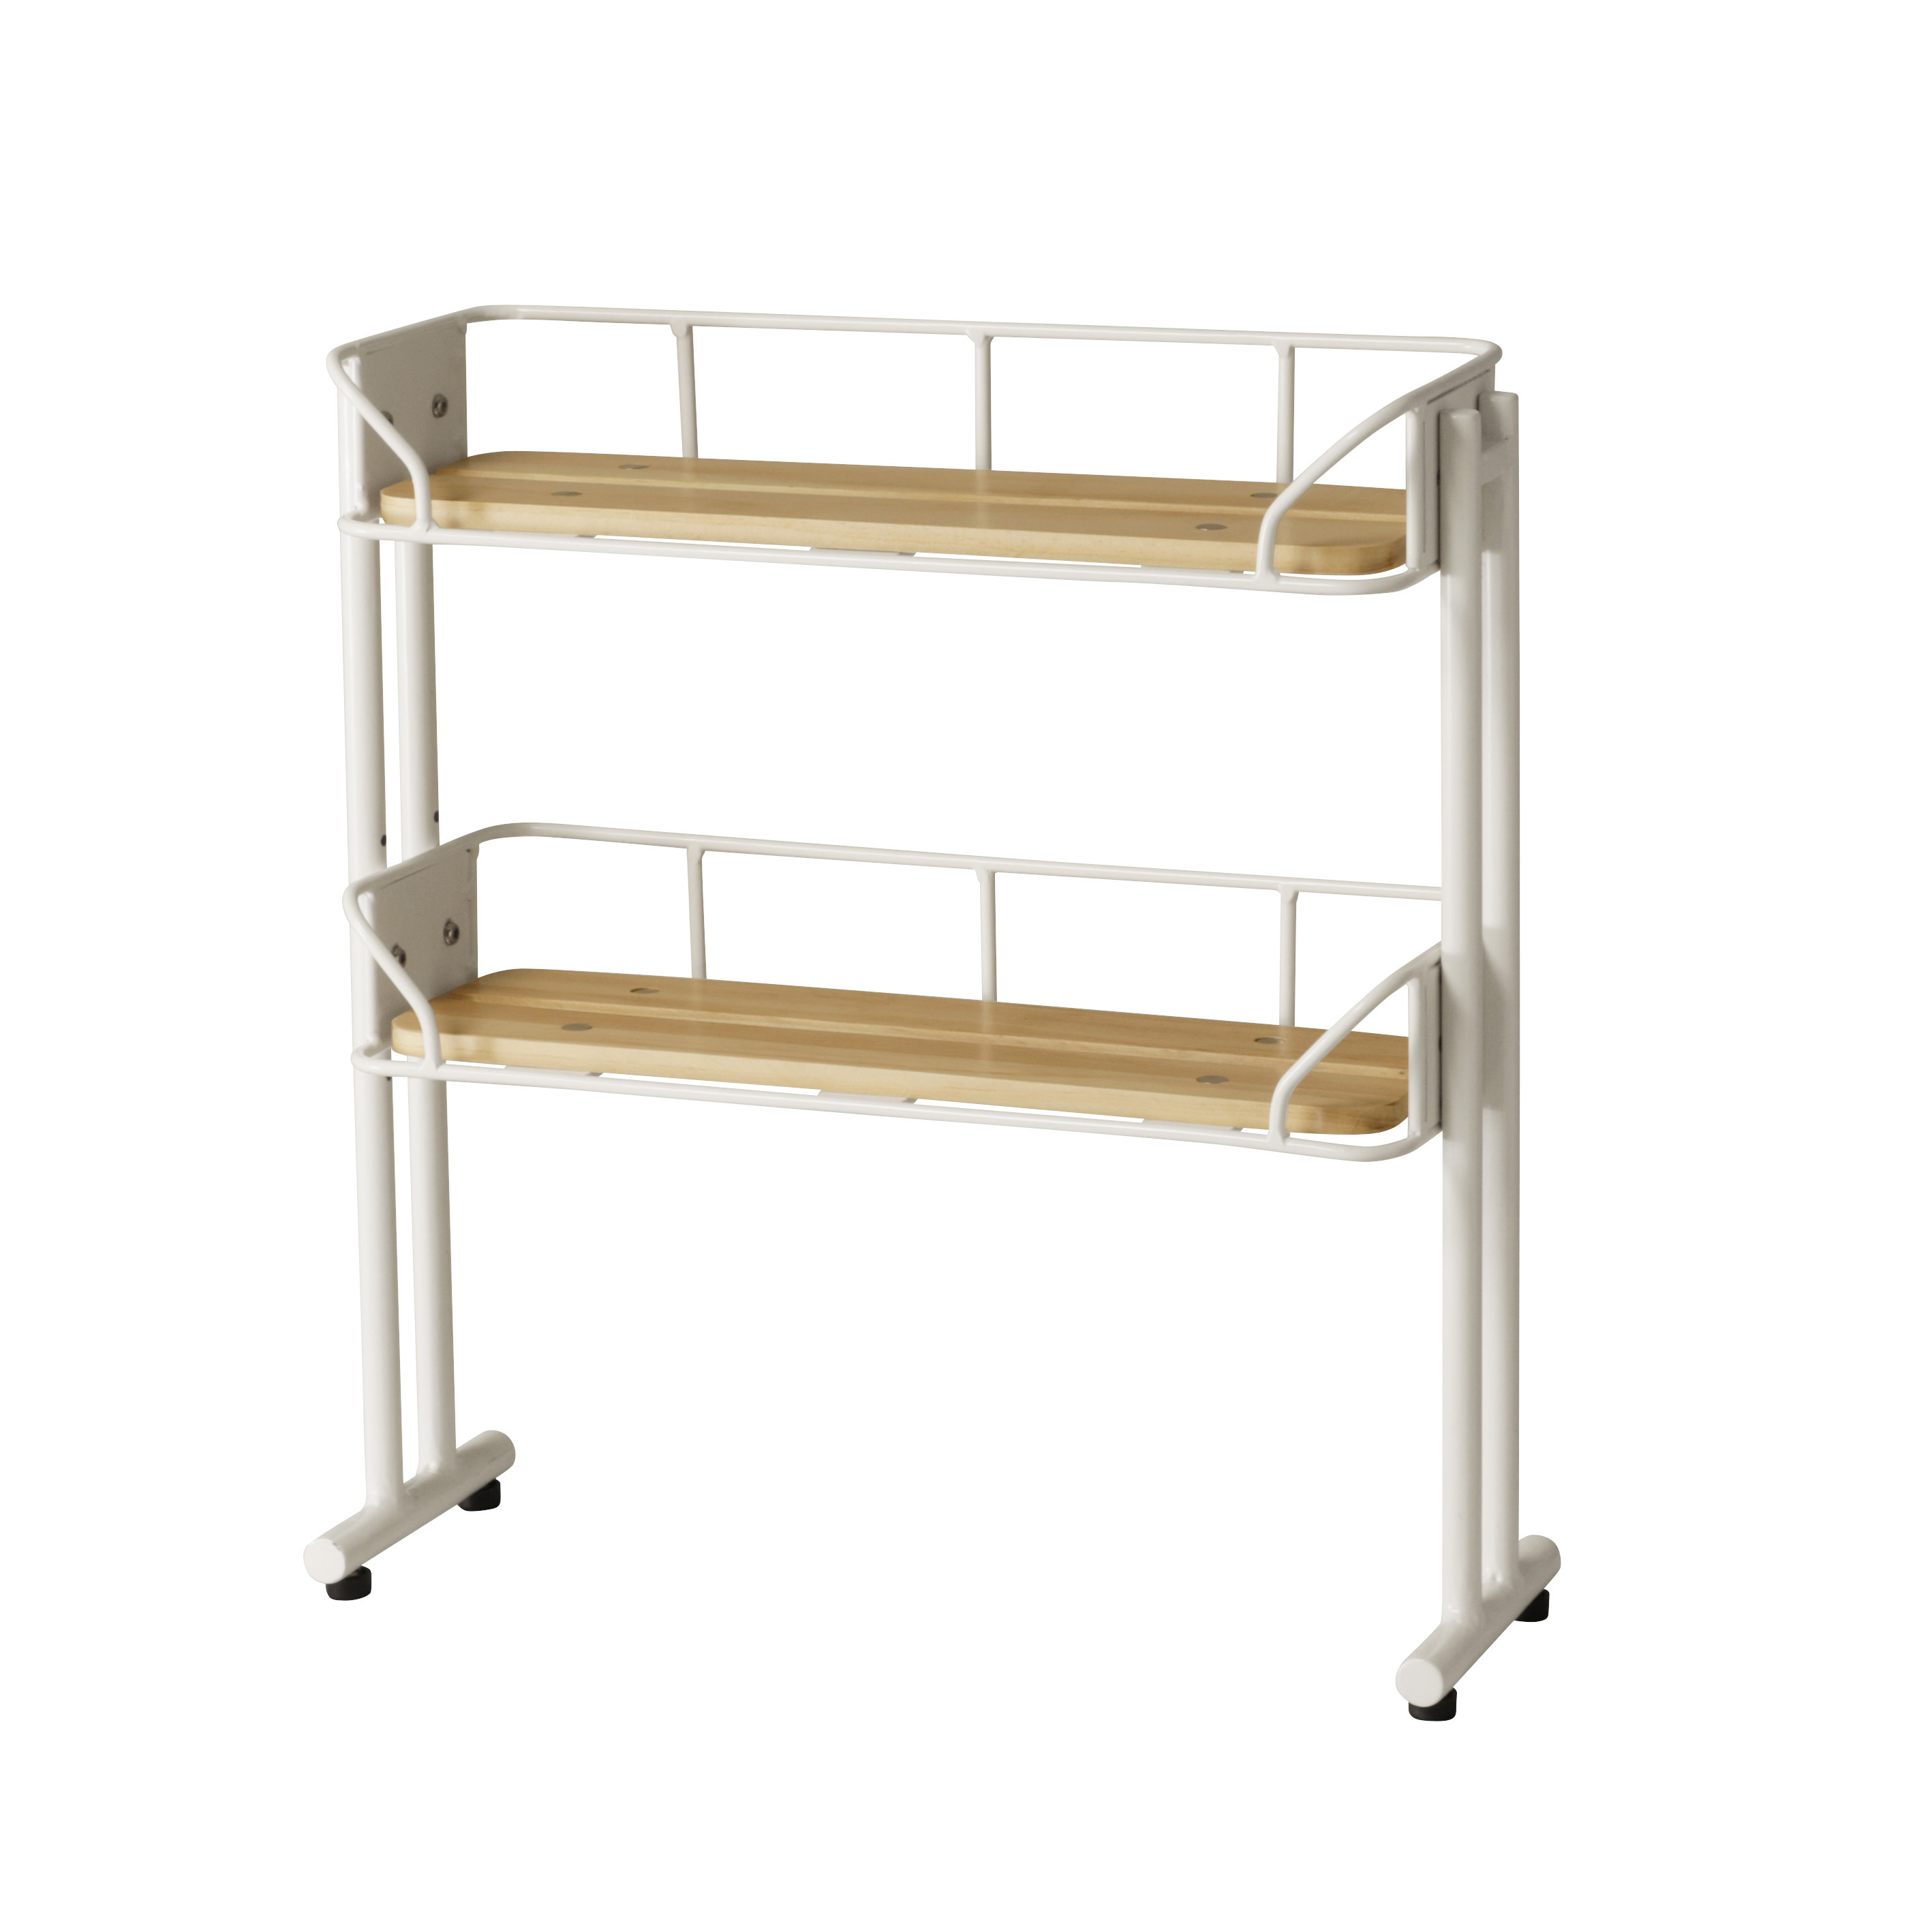 BY CAGE　MULTI RACK-S